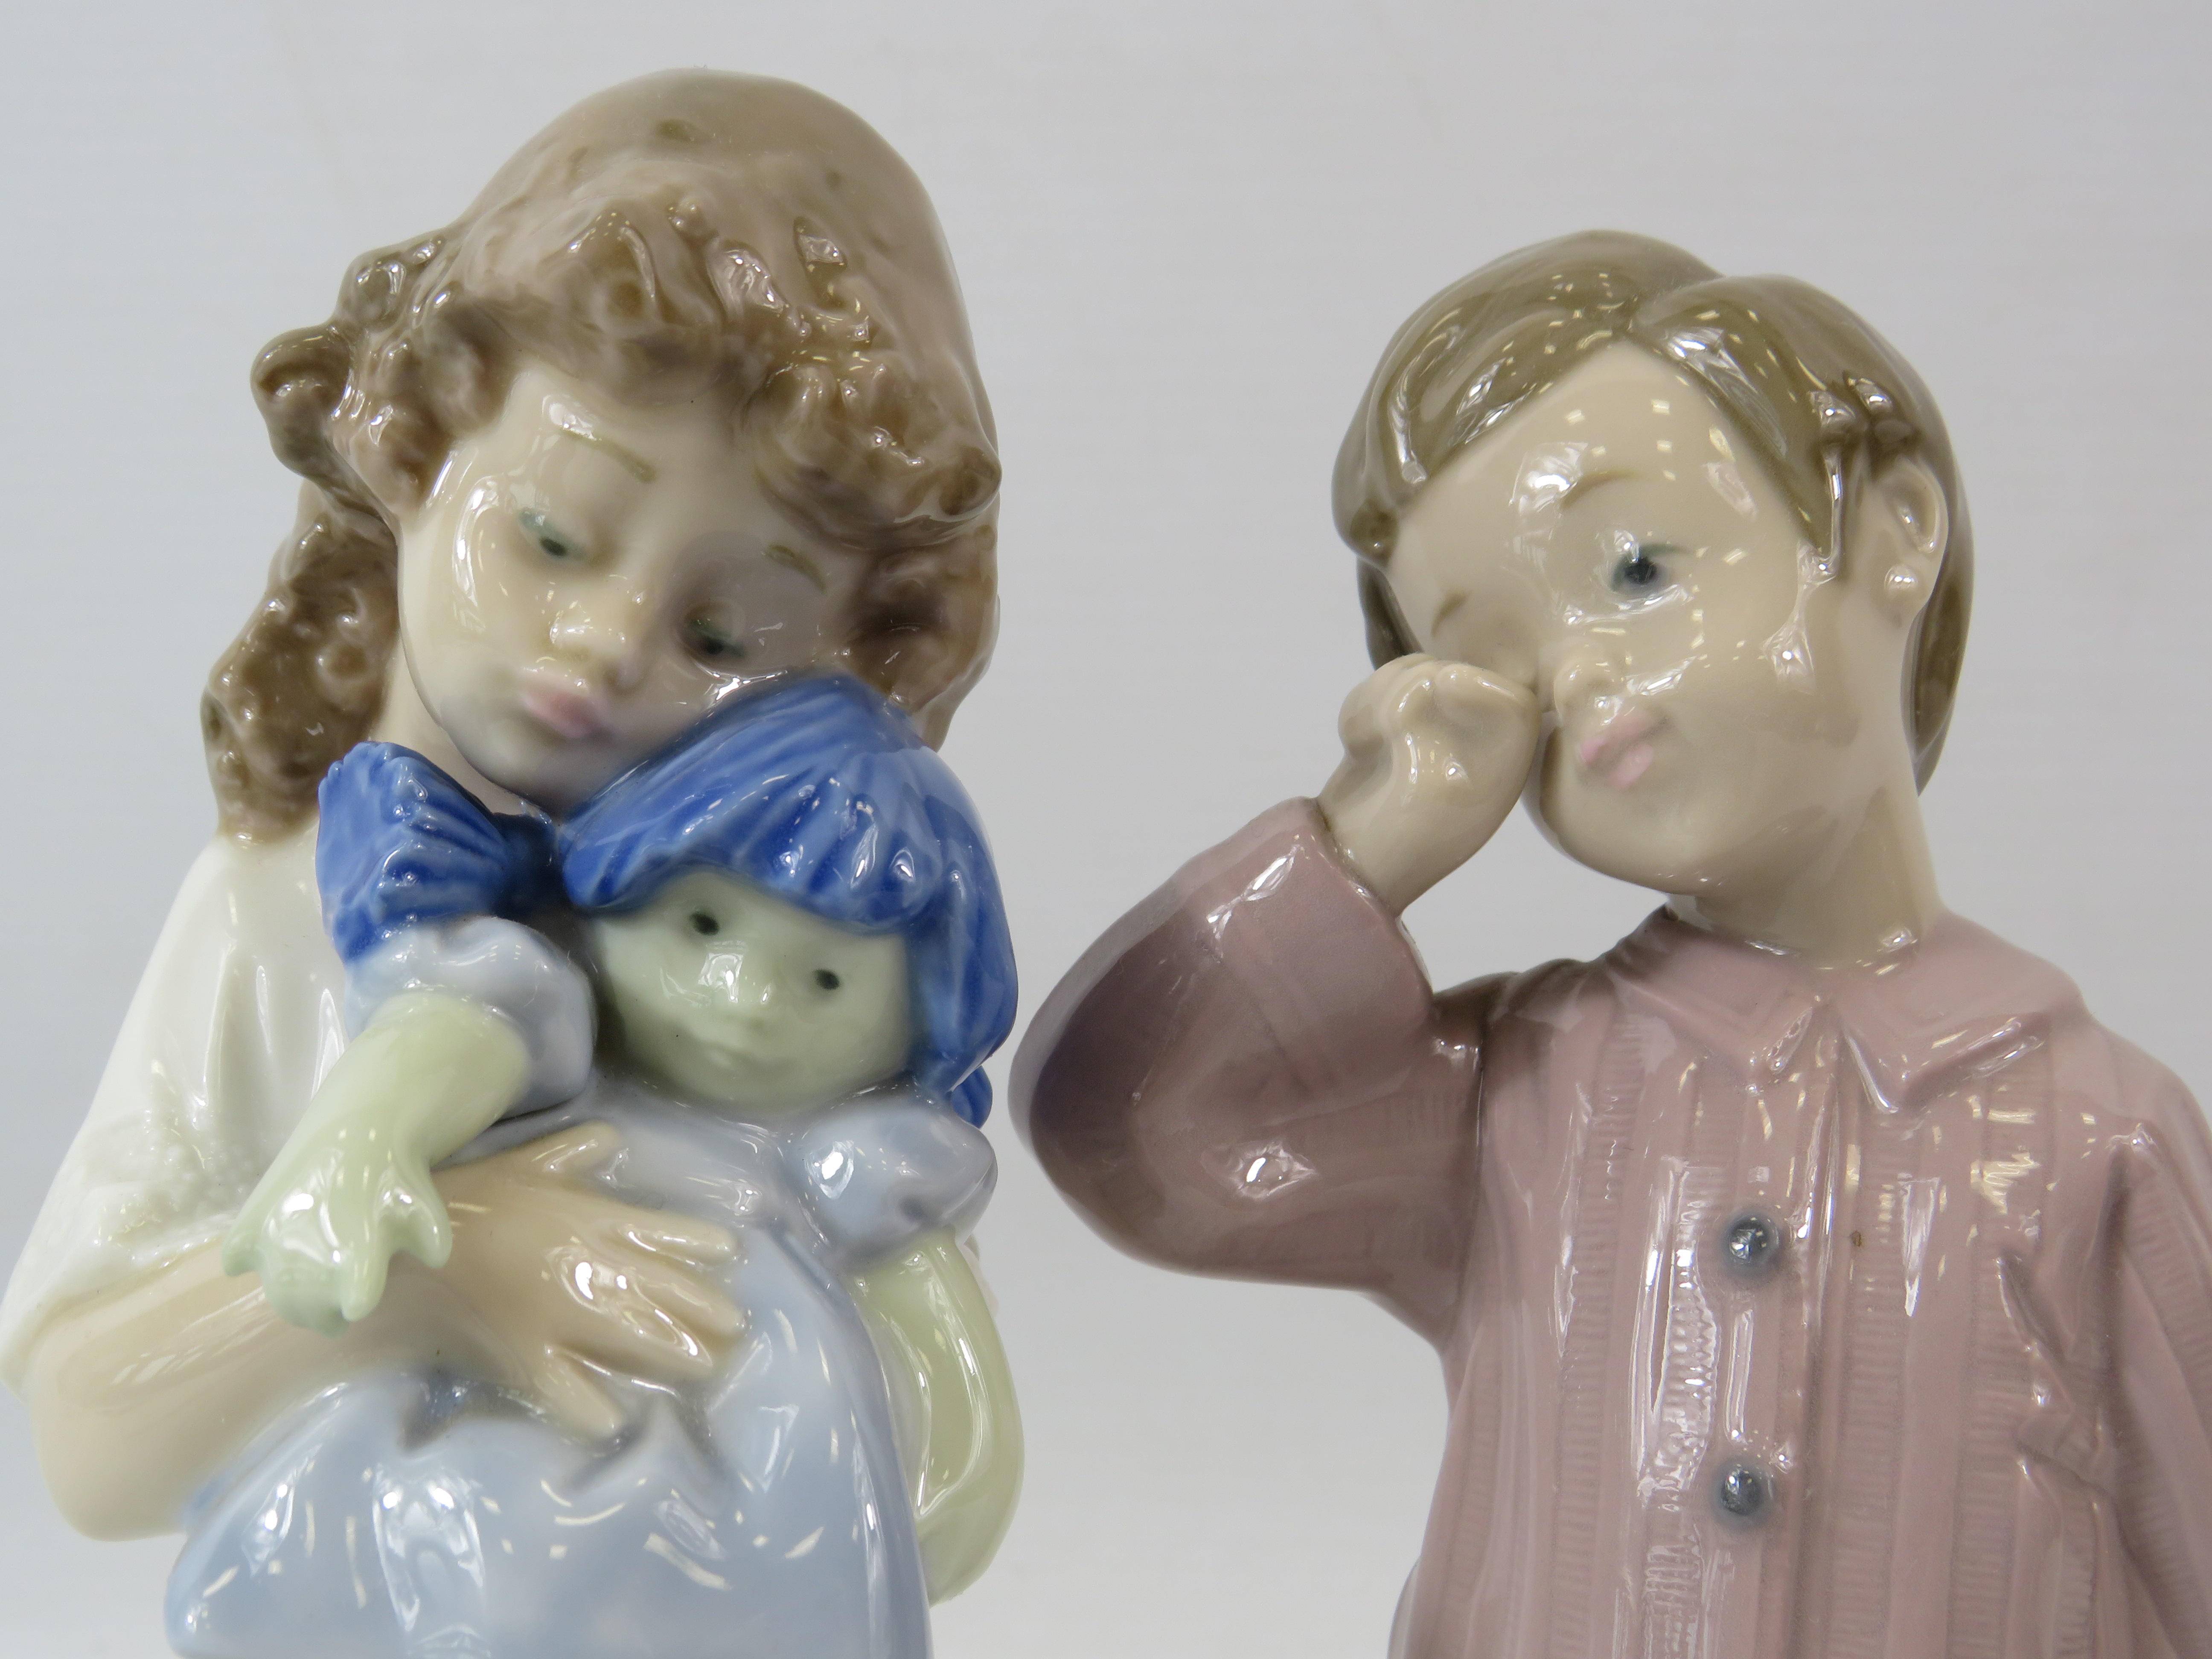 2 Nao Lladro figurines, a girl with a doll and a boy with a teddy the tallest measures 8". - Image 2 of 4